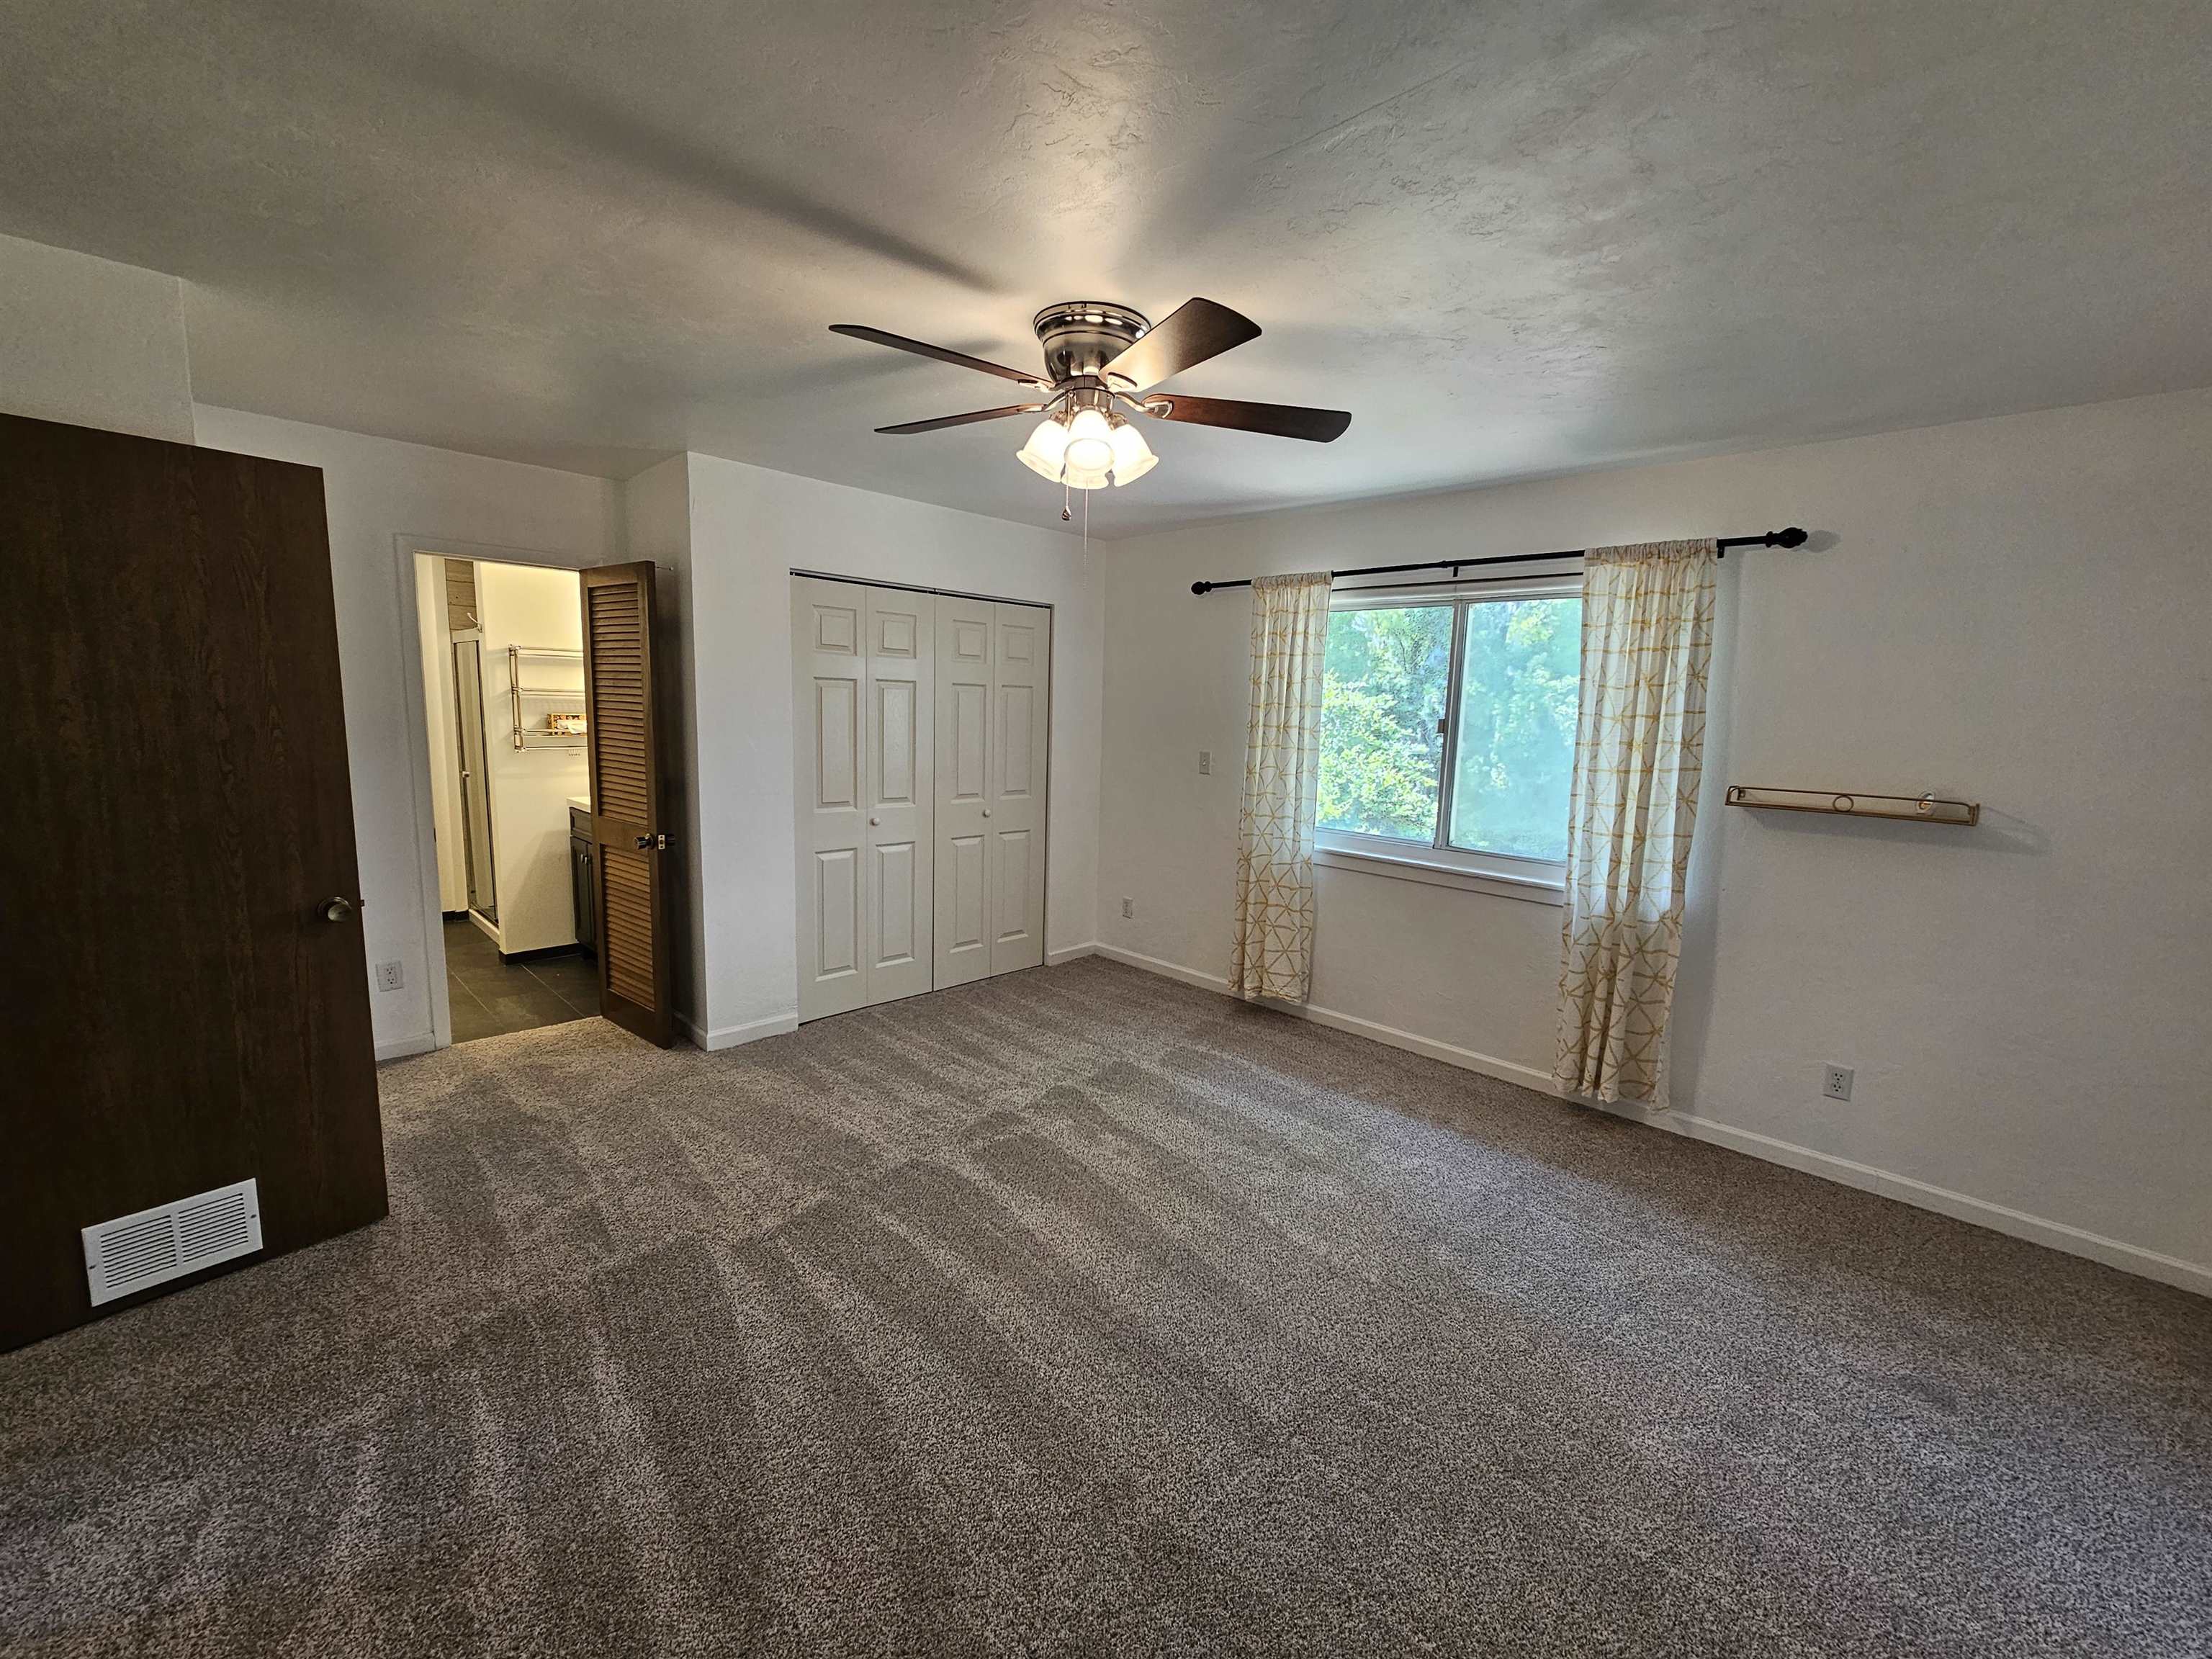 2856 Blair Stone Court,TALLAHASSEE,Florida 32301,2 Bedrooms Bedrooms,2 BathroomsBathrooms,Townhouse,2856 Blair Stone Court,369804